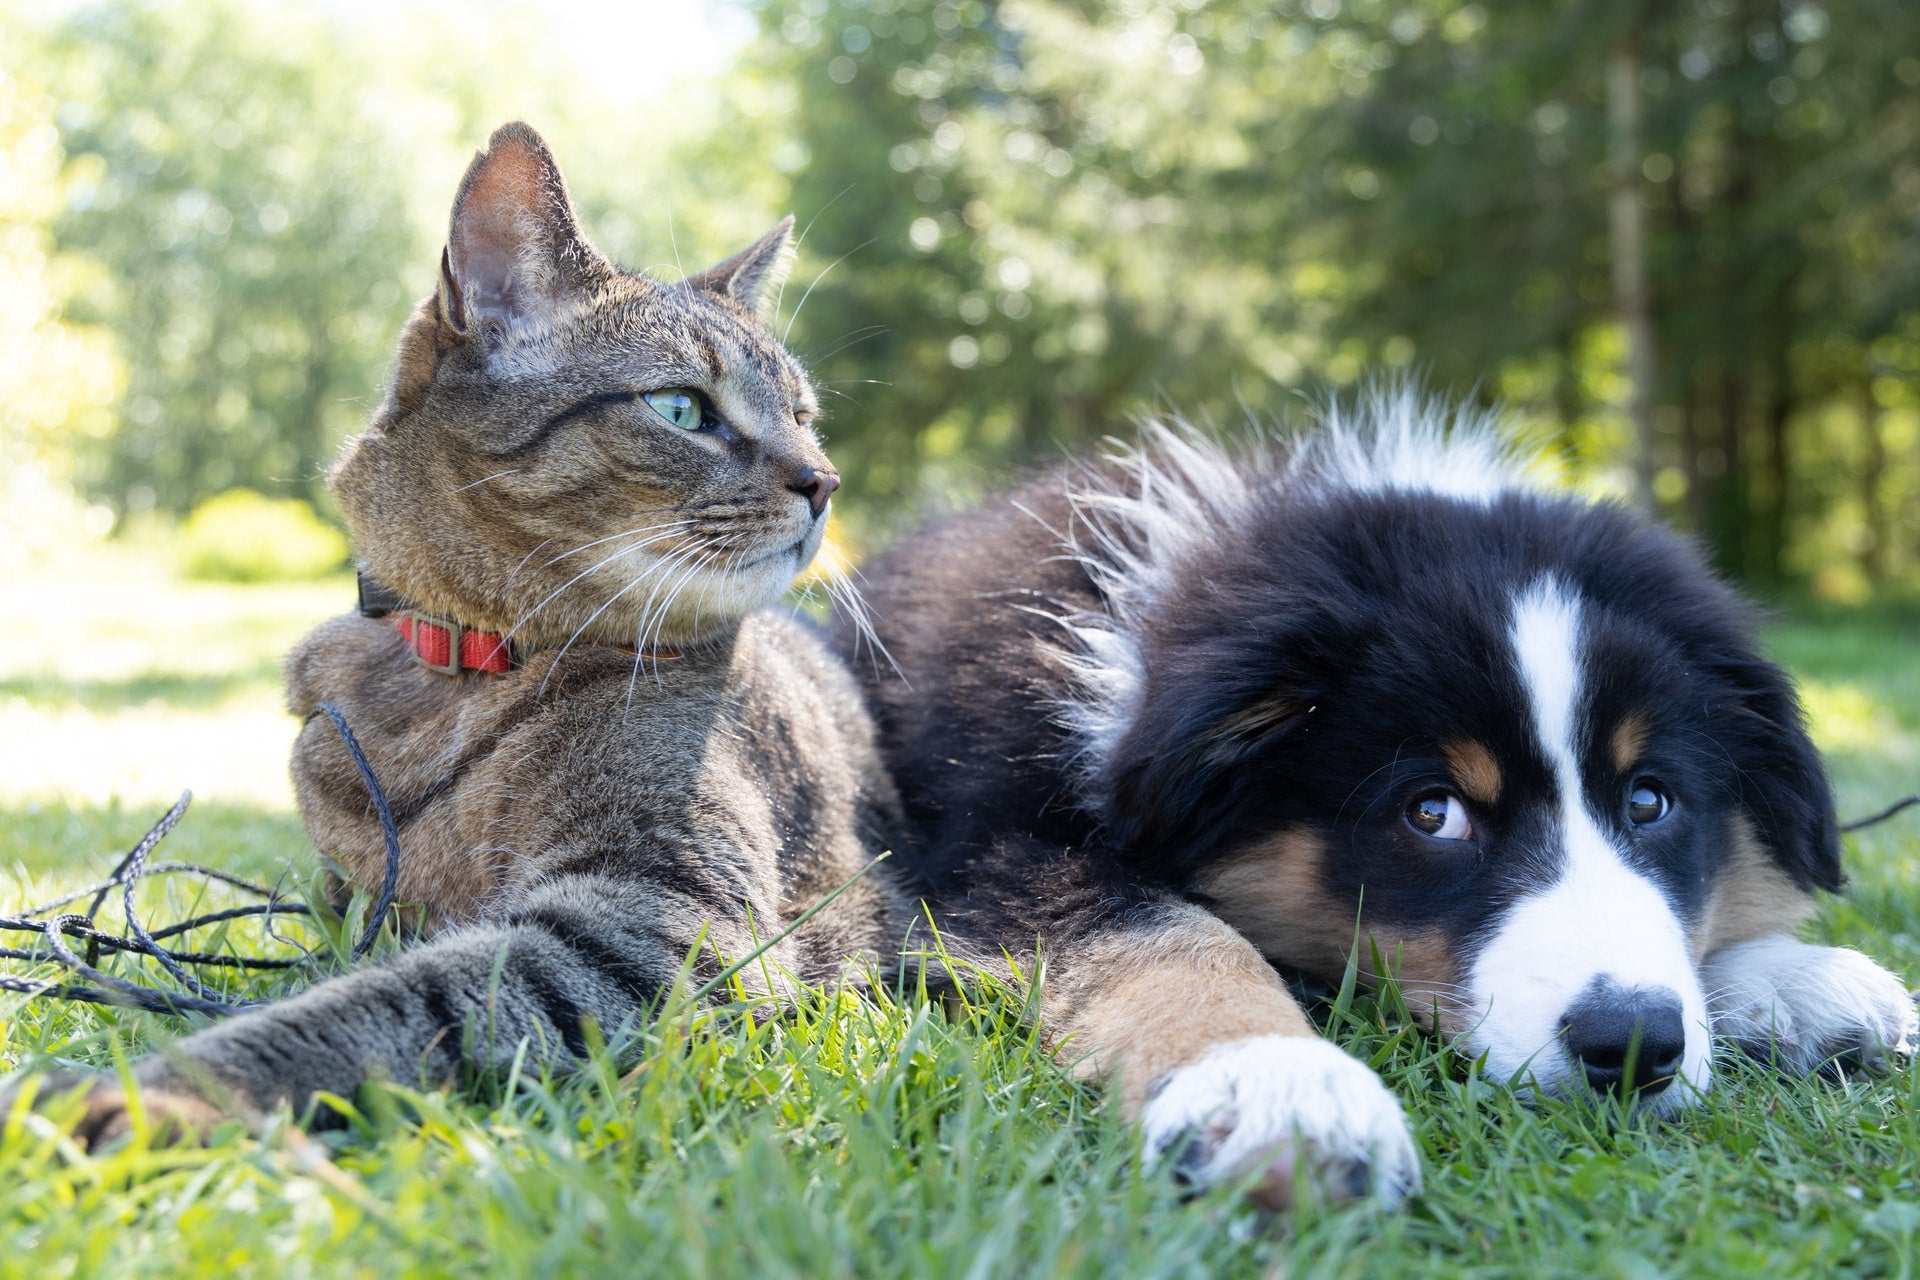 Can Cats And Dogs Live Together In Perfect Harmony?